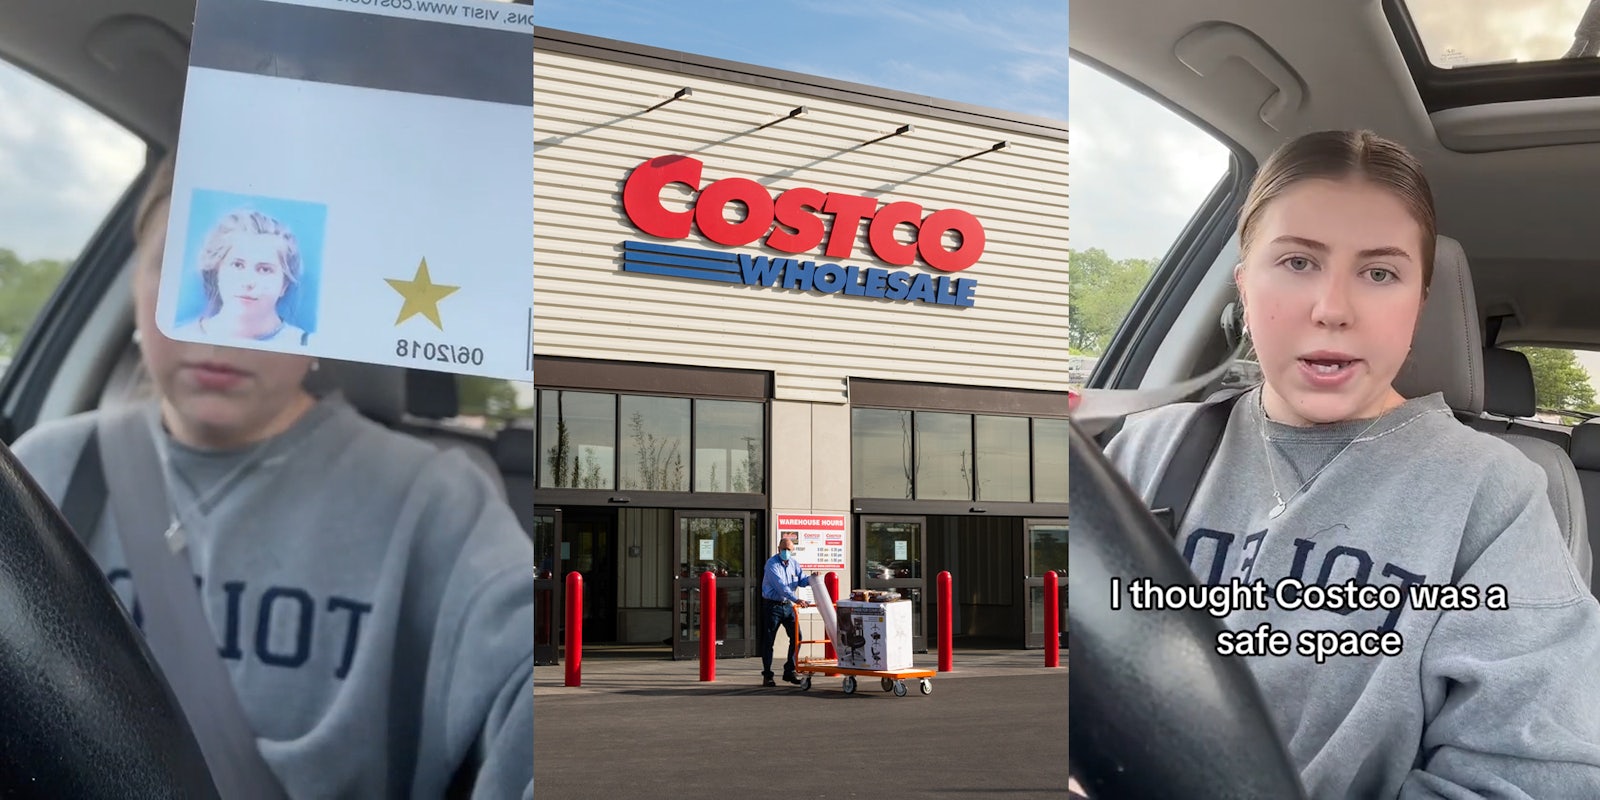 Costco customer holding card photo in car (l) Costco building with sign (c) Costco customer speaking in car with capti9on 'I thought Costco was a safe space' (r)